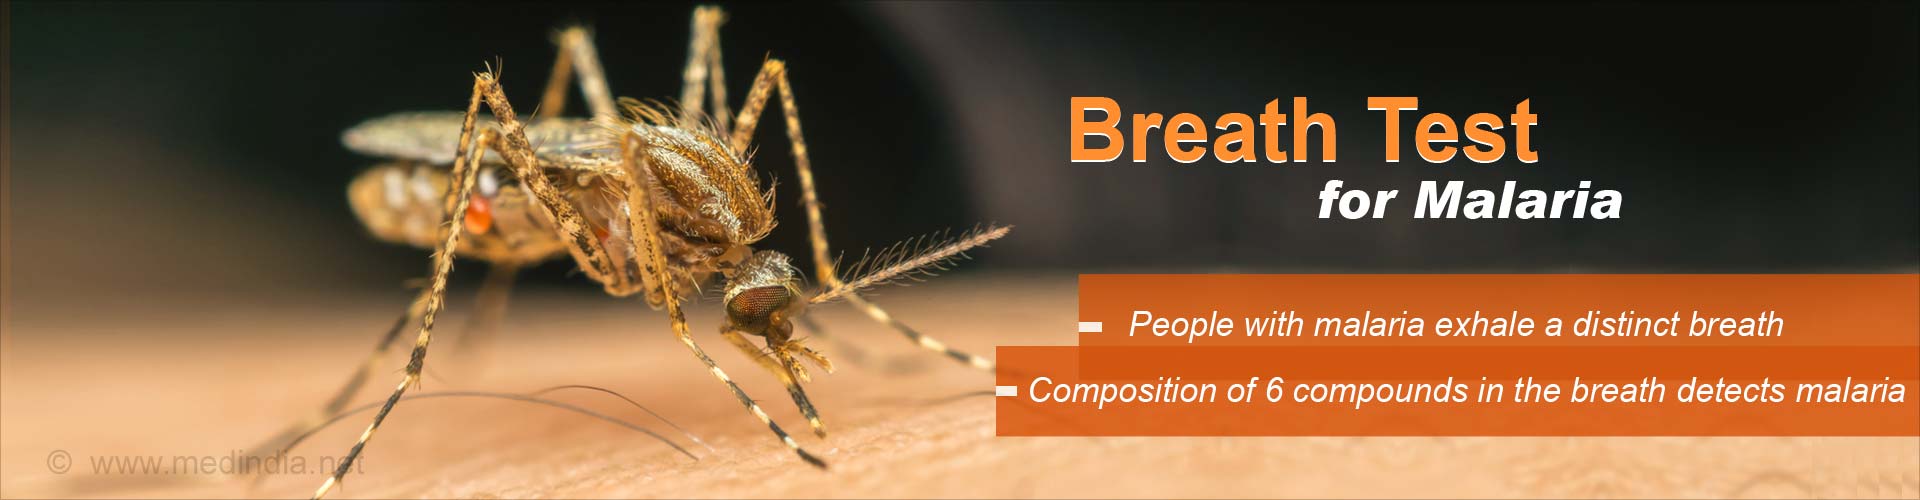 breath test for malaria
- people with malaria exhale a distinct breath
- composition of 6 compounds in the breath detects malaria